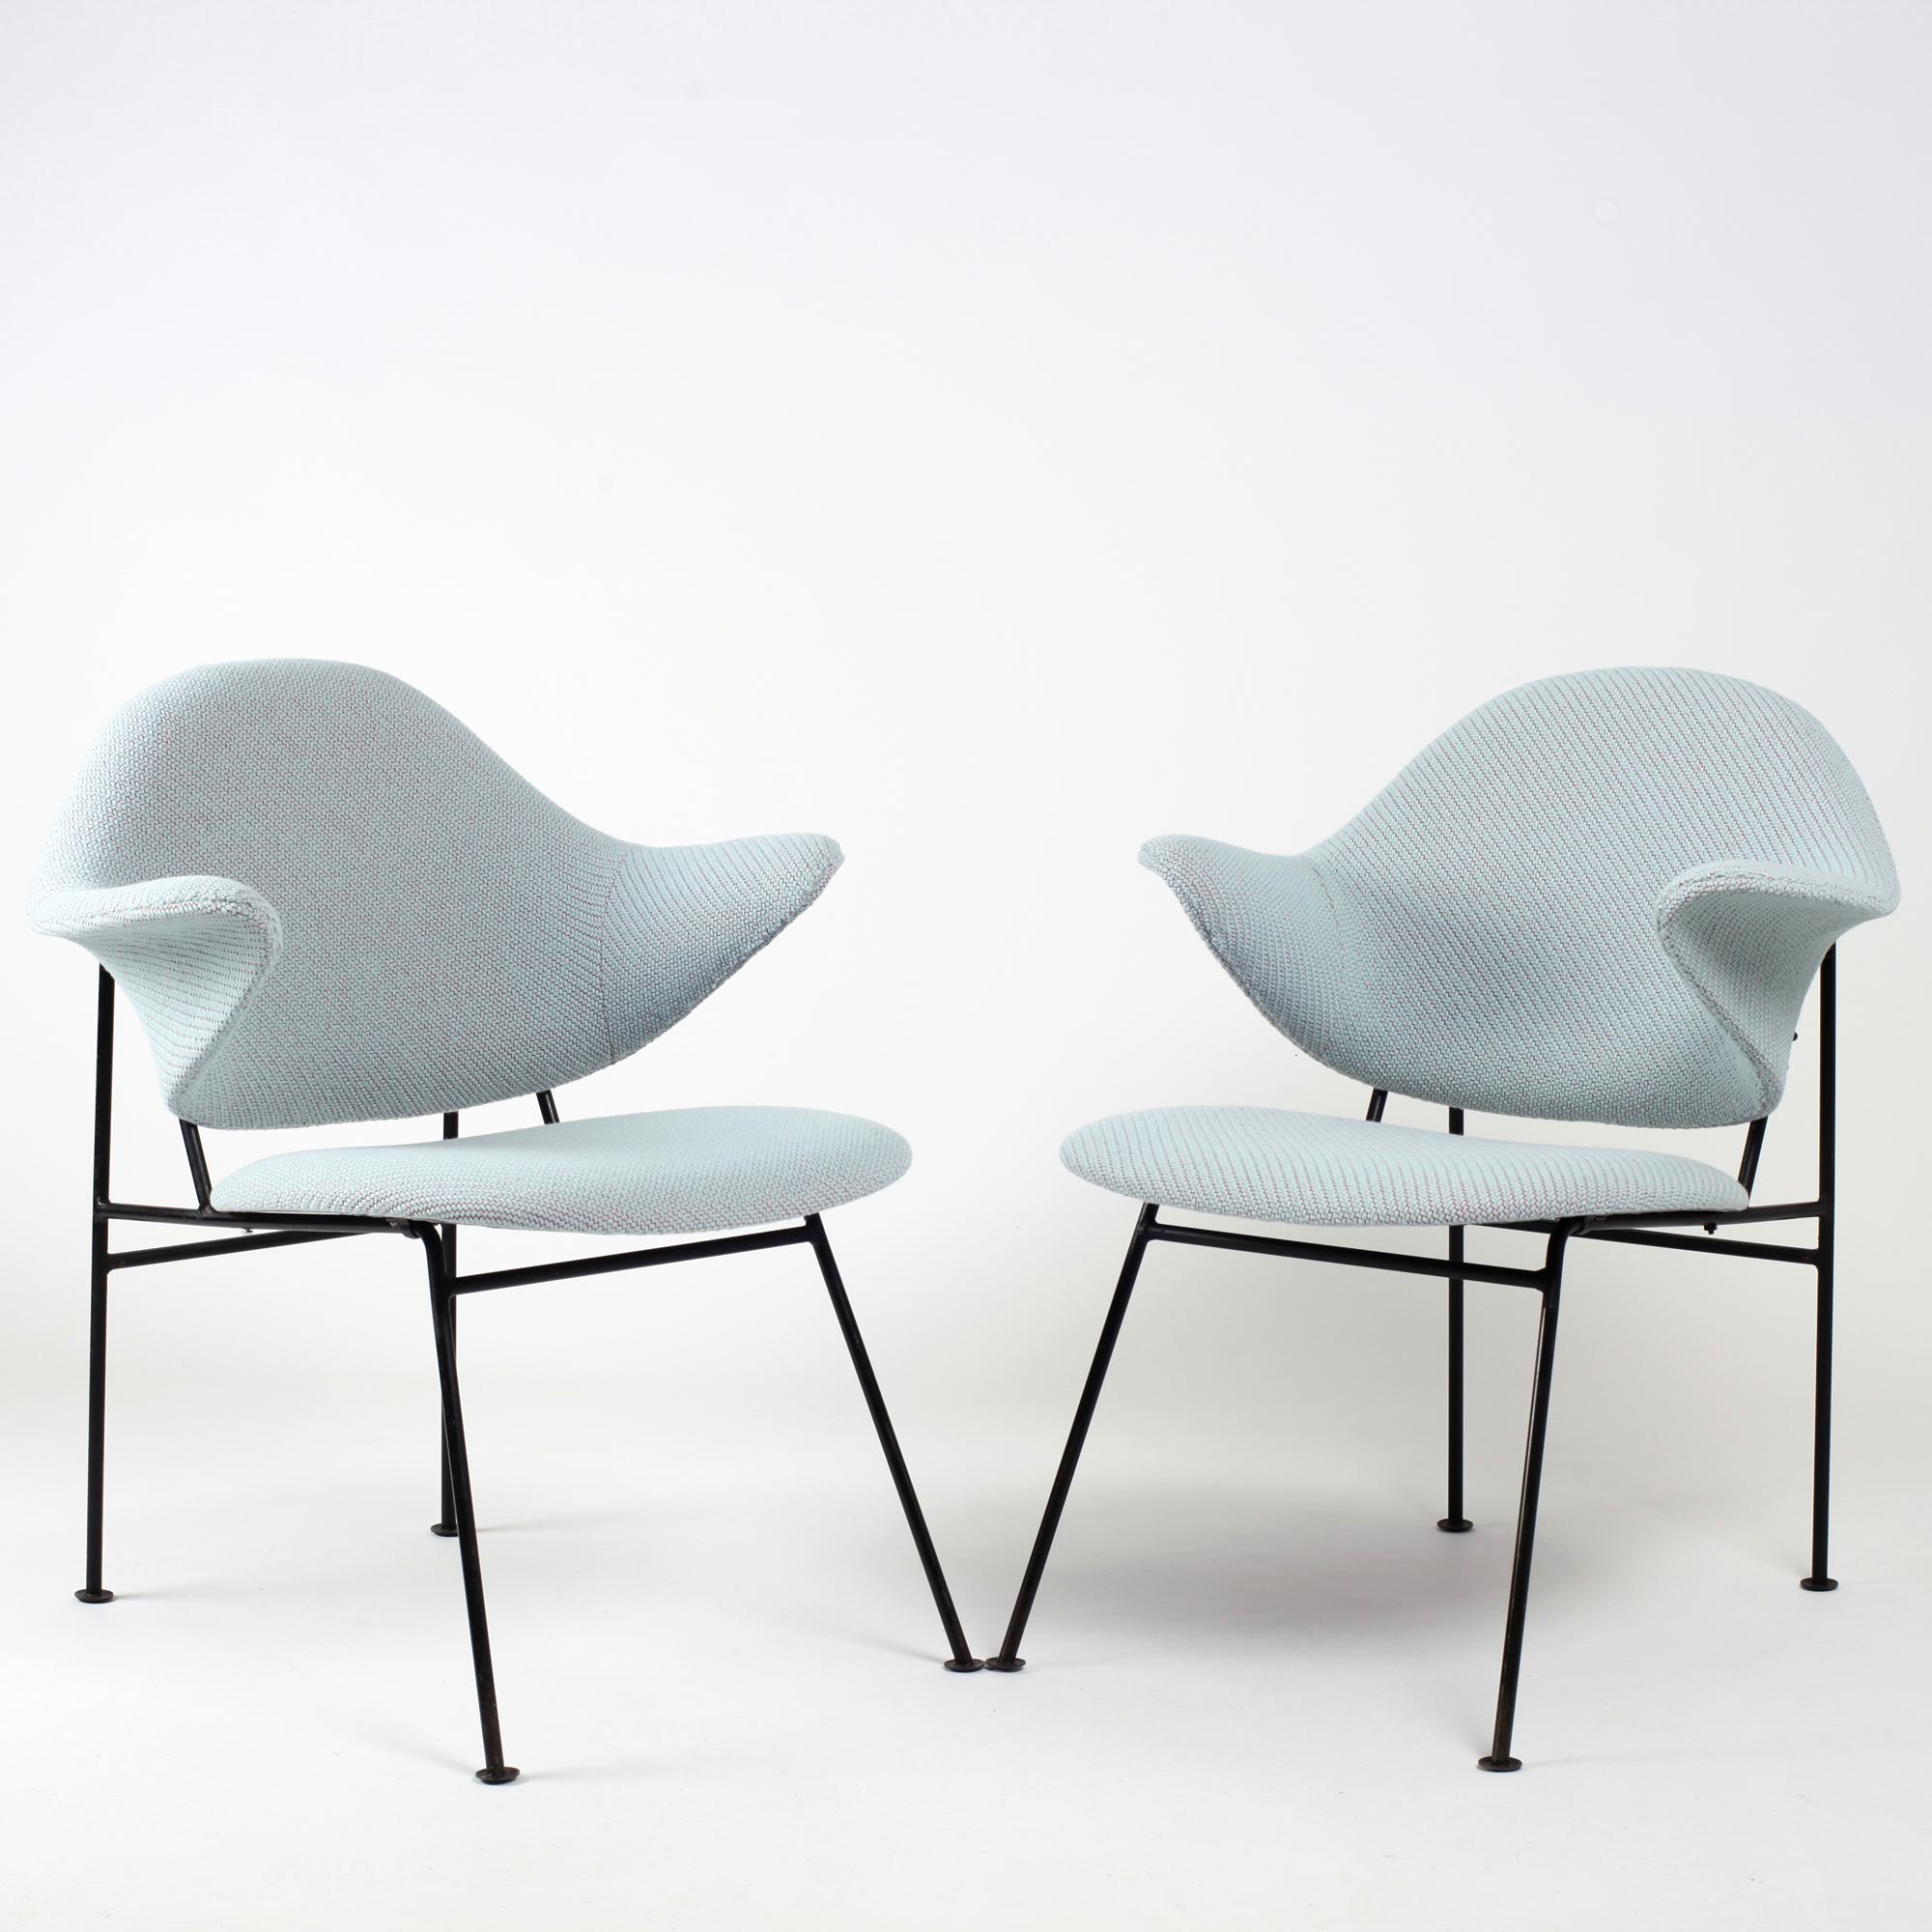 A rare pair of armchairs by Thonet from 1950's seen at the 